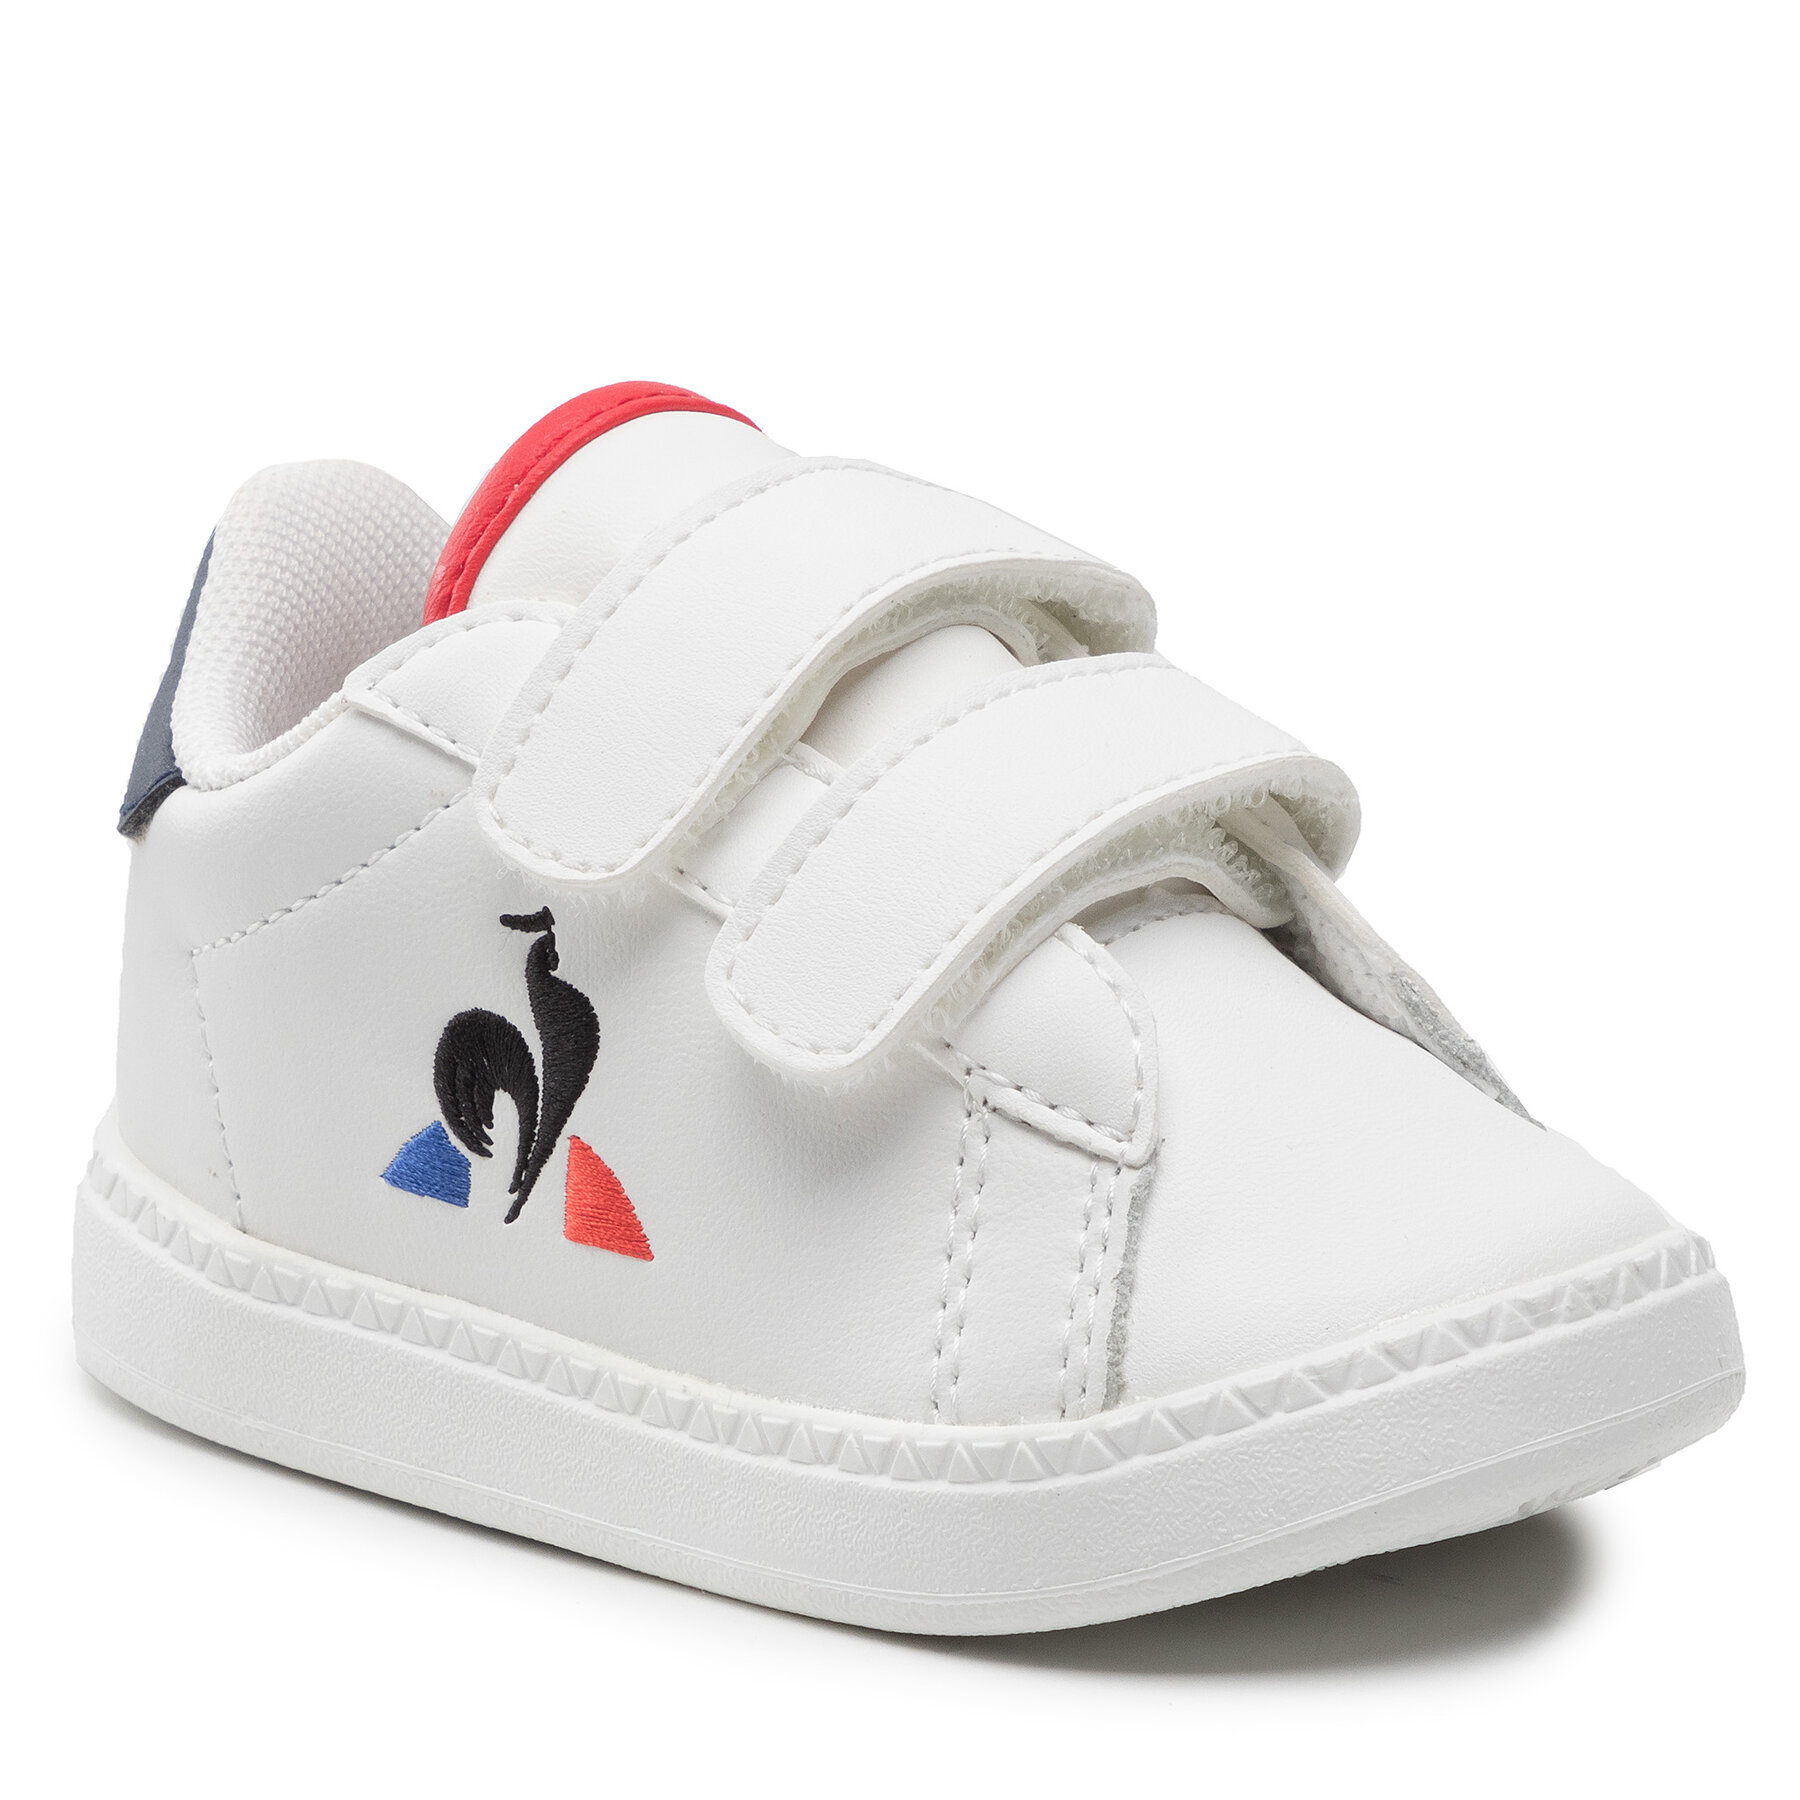 Superge Le Coq Sportif Courtset Inf 2210149 Optical White